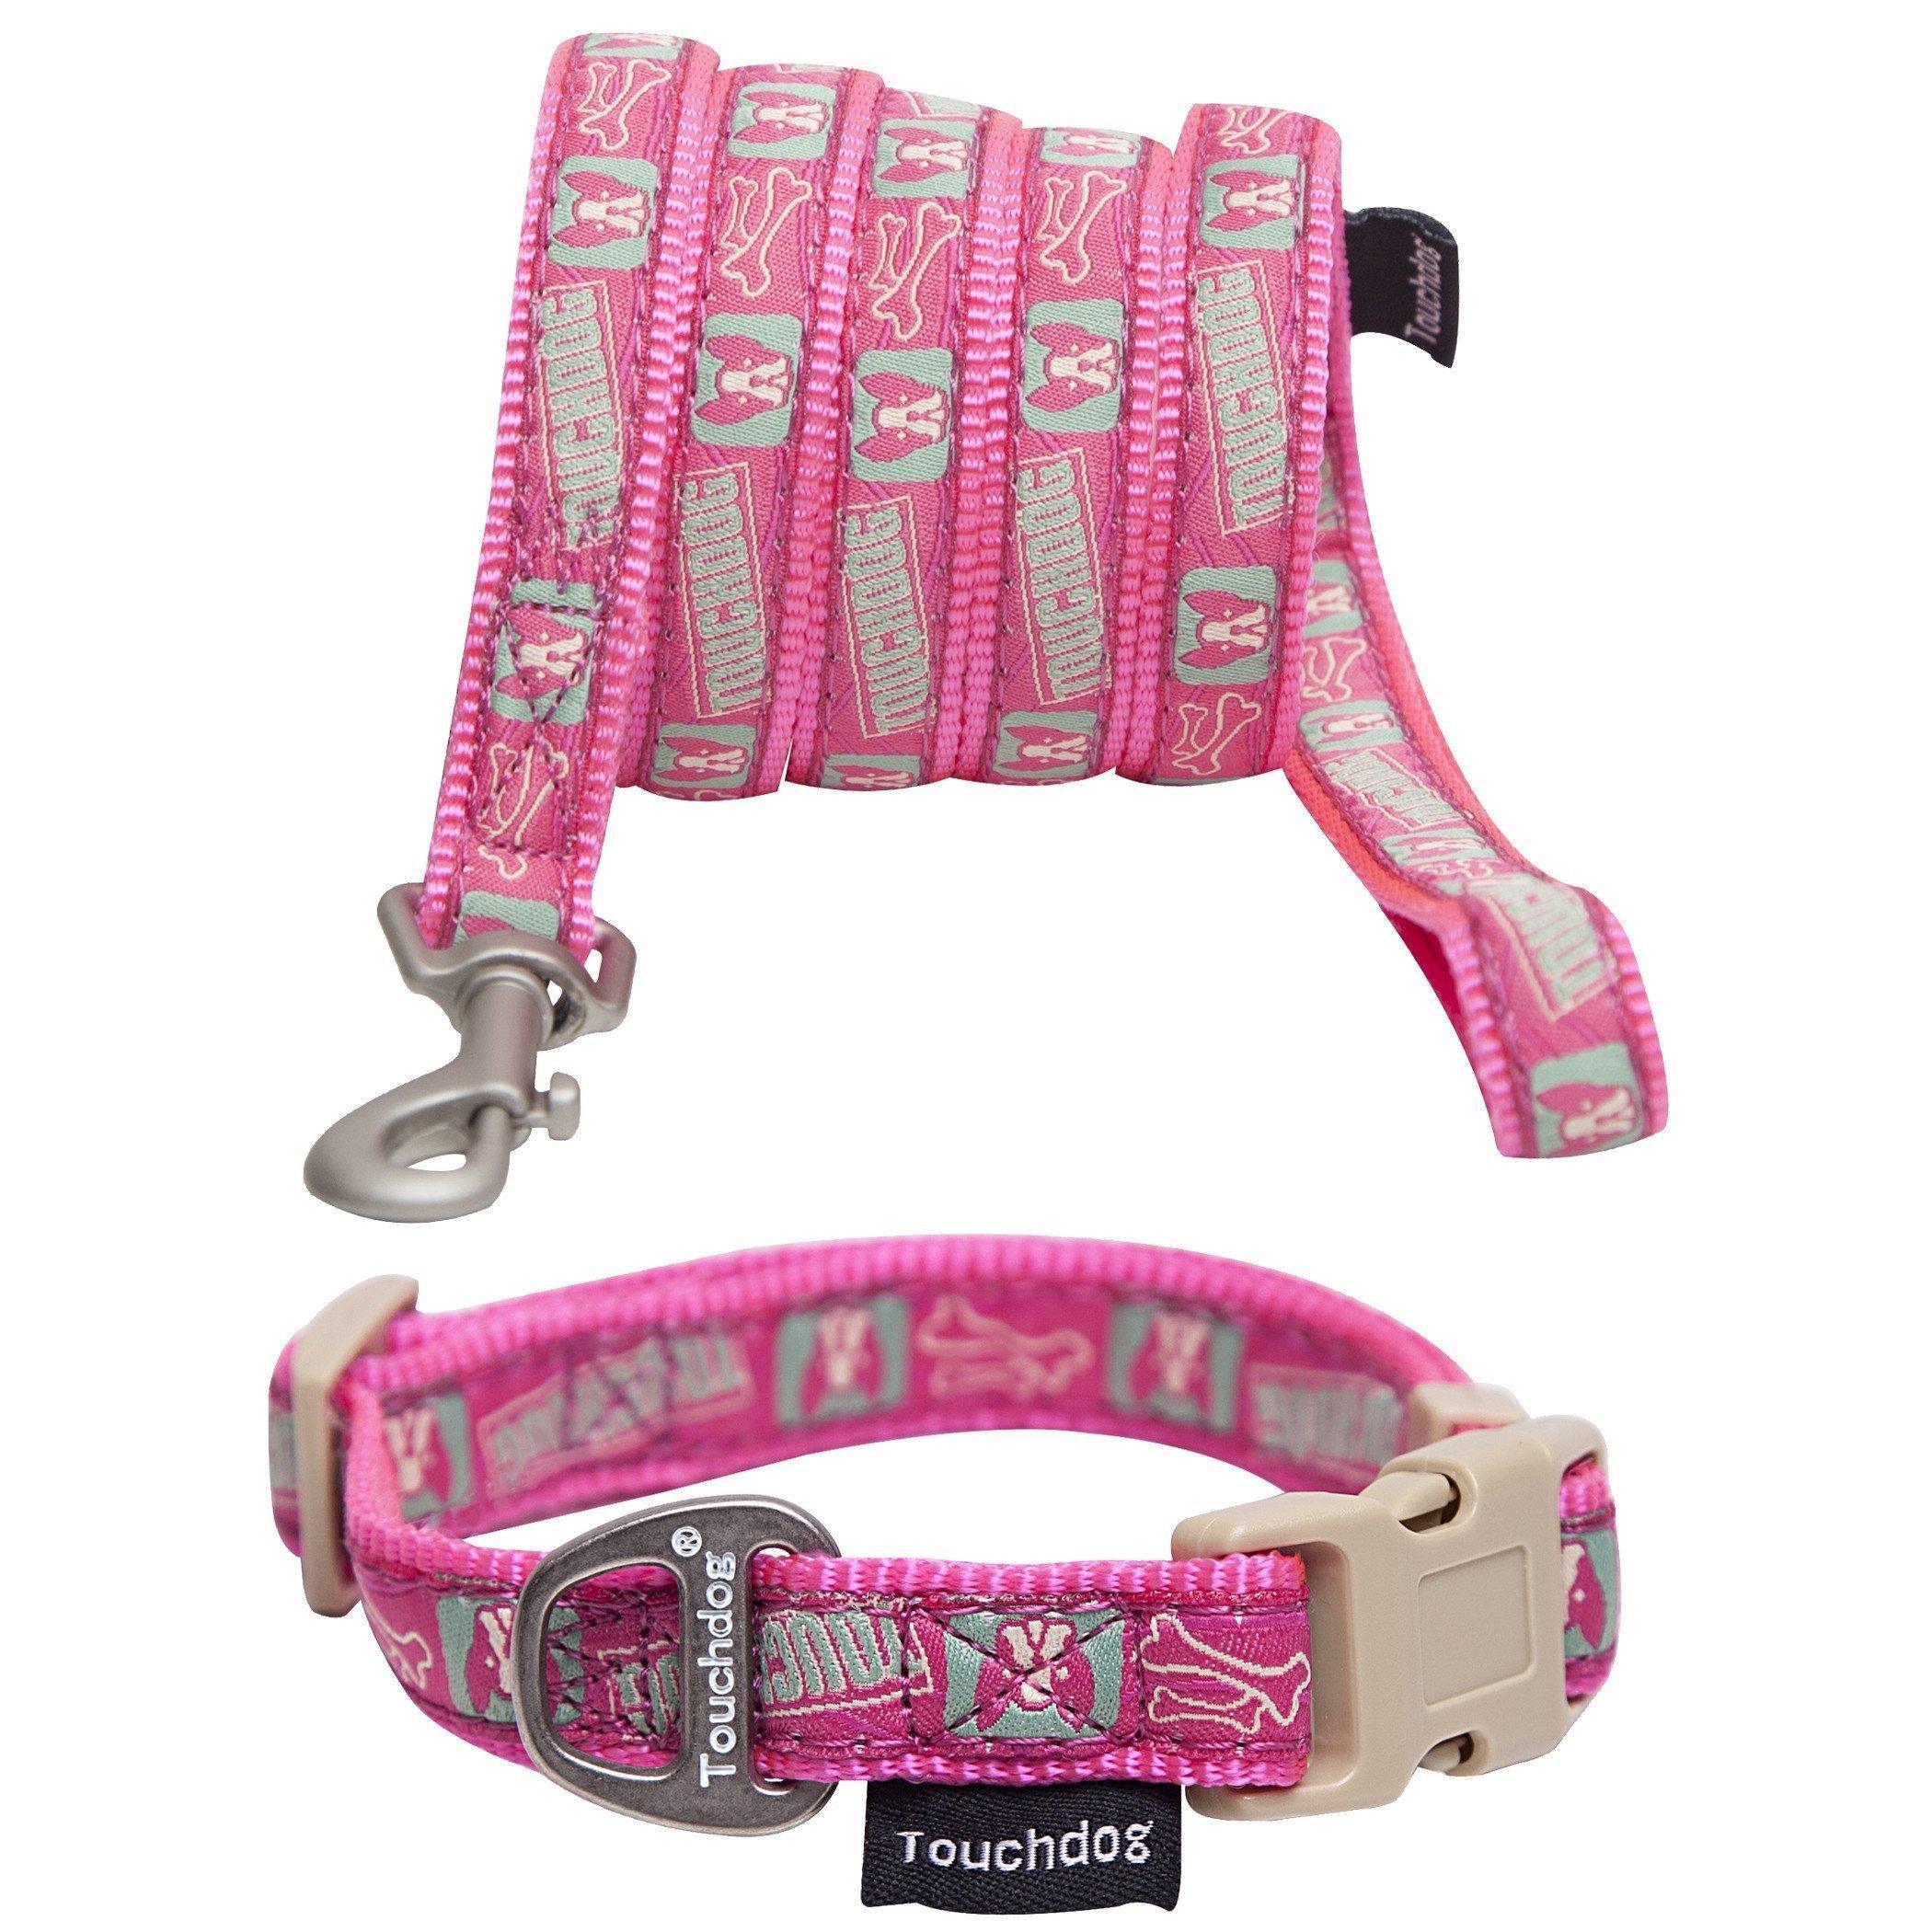 Touchdog ® 'Caliber' Designer Embroidered Fashion Pet Dog Leash and Collar Combination Small Pink Pattern